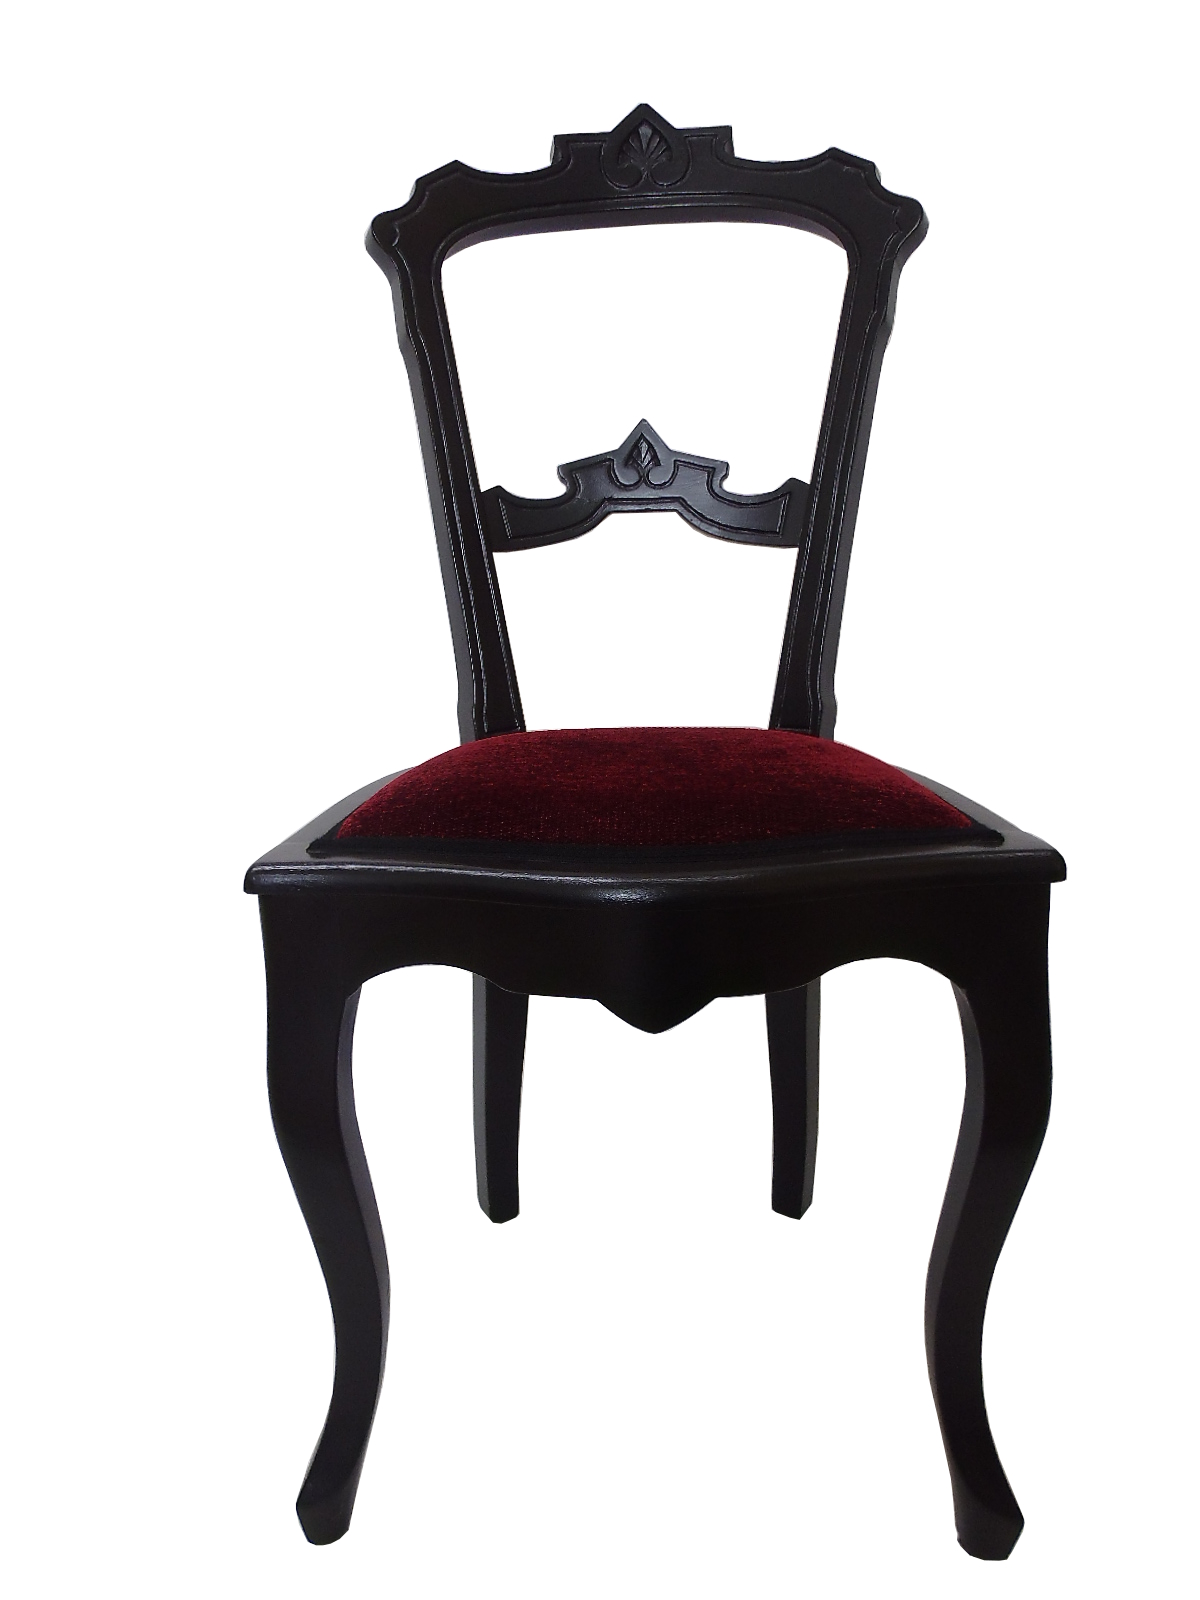 manager Verbinding verbroken lichtgewicht Baroque Finca Chair in Stained Black with New Red Upholstery - Original  Antique Furniture